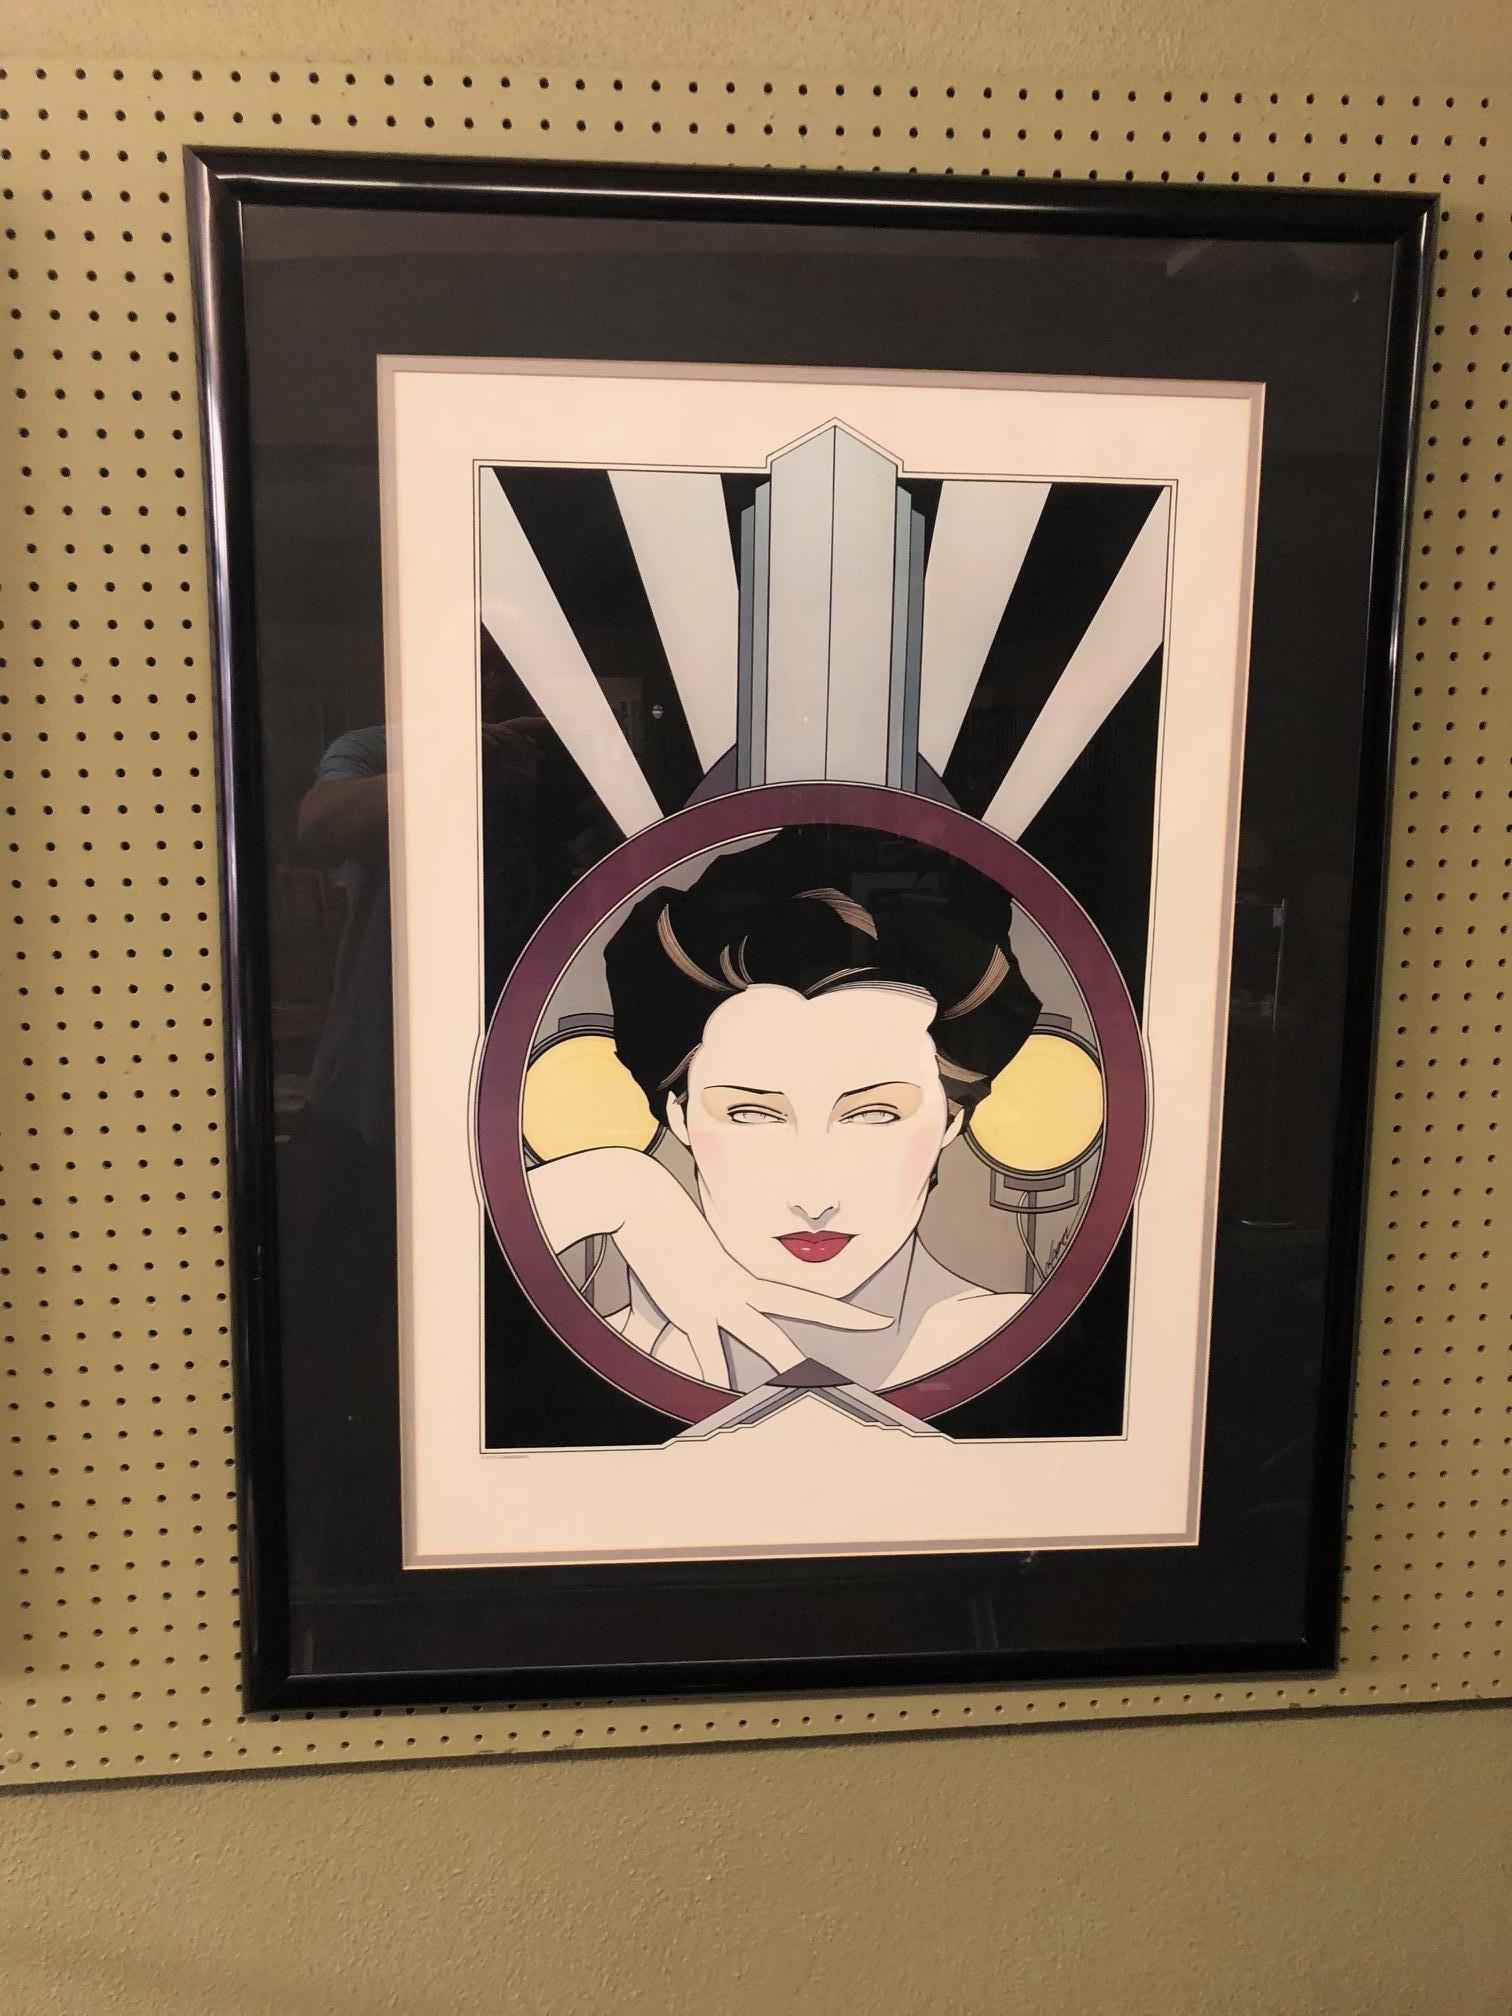 Limited edition serigraph (silkscreen) by Patrick Nagel, circa 1979.

Patrick Nagel was an American artist who did work for Playboy magazine throughout the 1980s. He created popular illustrations on board, paper and canvas, most of which emphasize